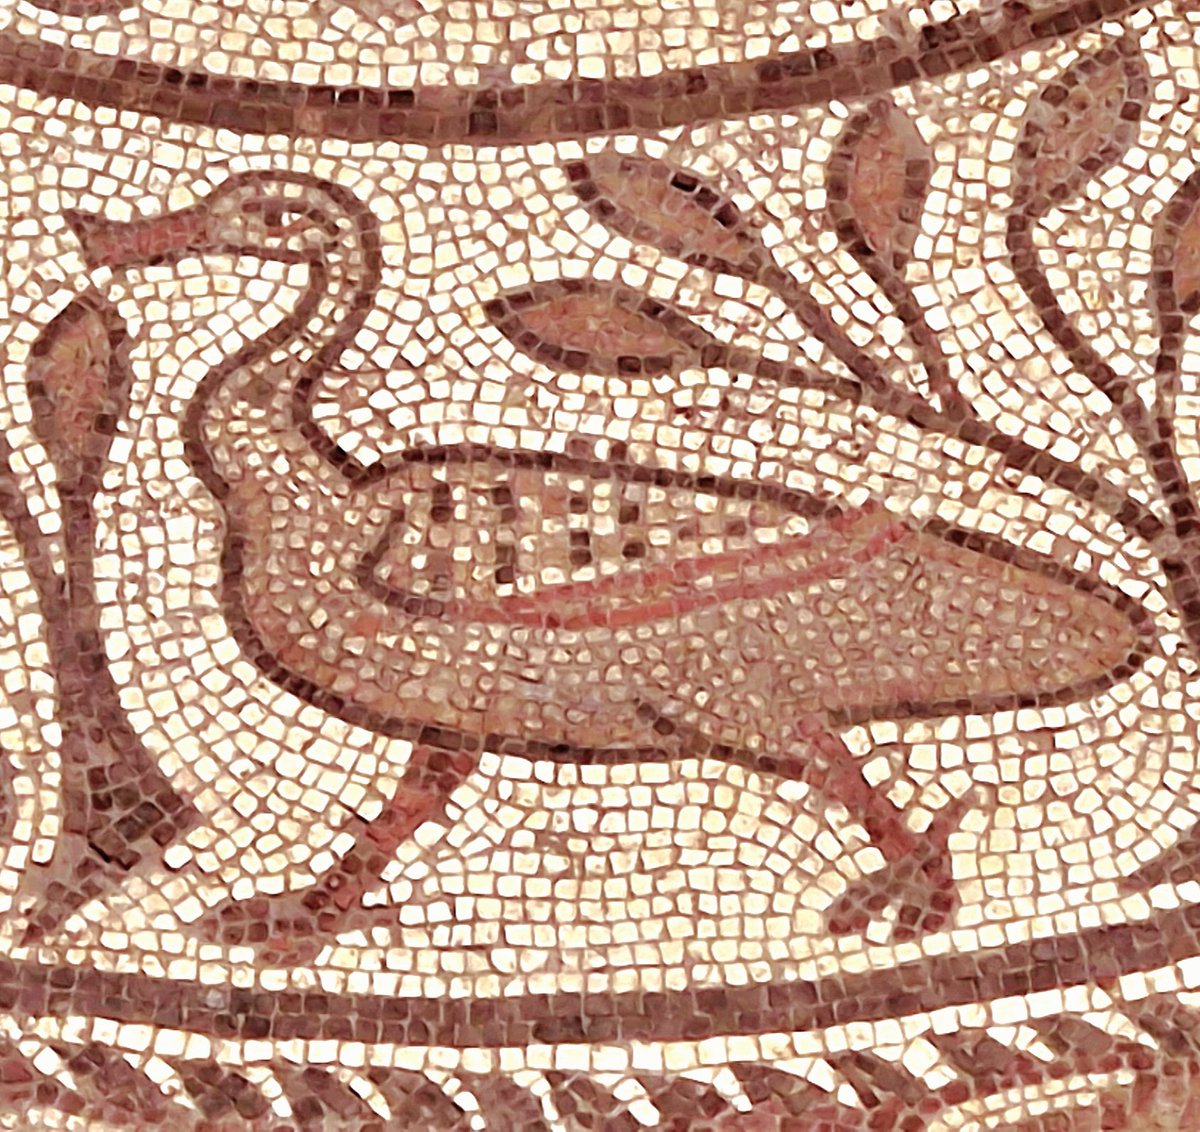 A dazzlingly disdainful duck struts her funky stuff at the centre of a 4th century #Roman mosaic from Barton Farm #Gloucestershire Found in 1824 and on display in the ever wonderful @CoriniumMuseum 📷 August 2022 #MosaicMonday